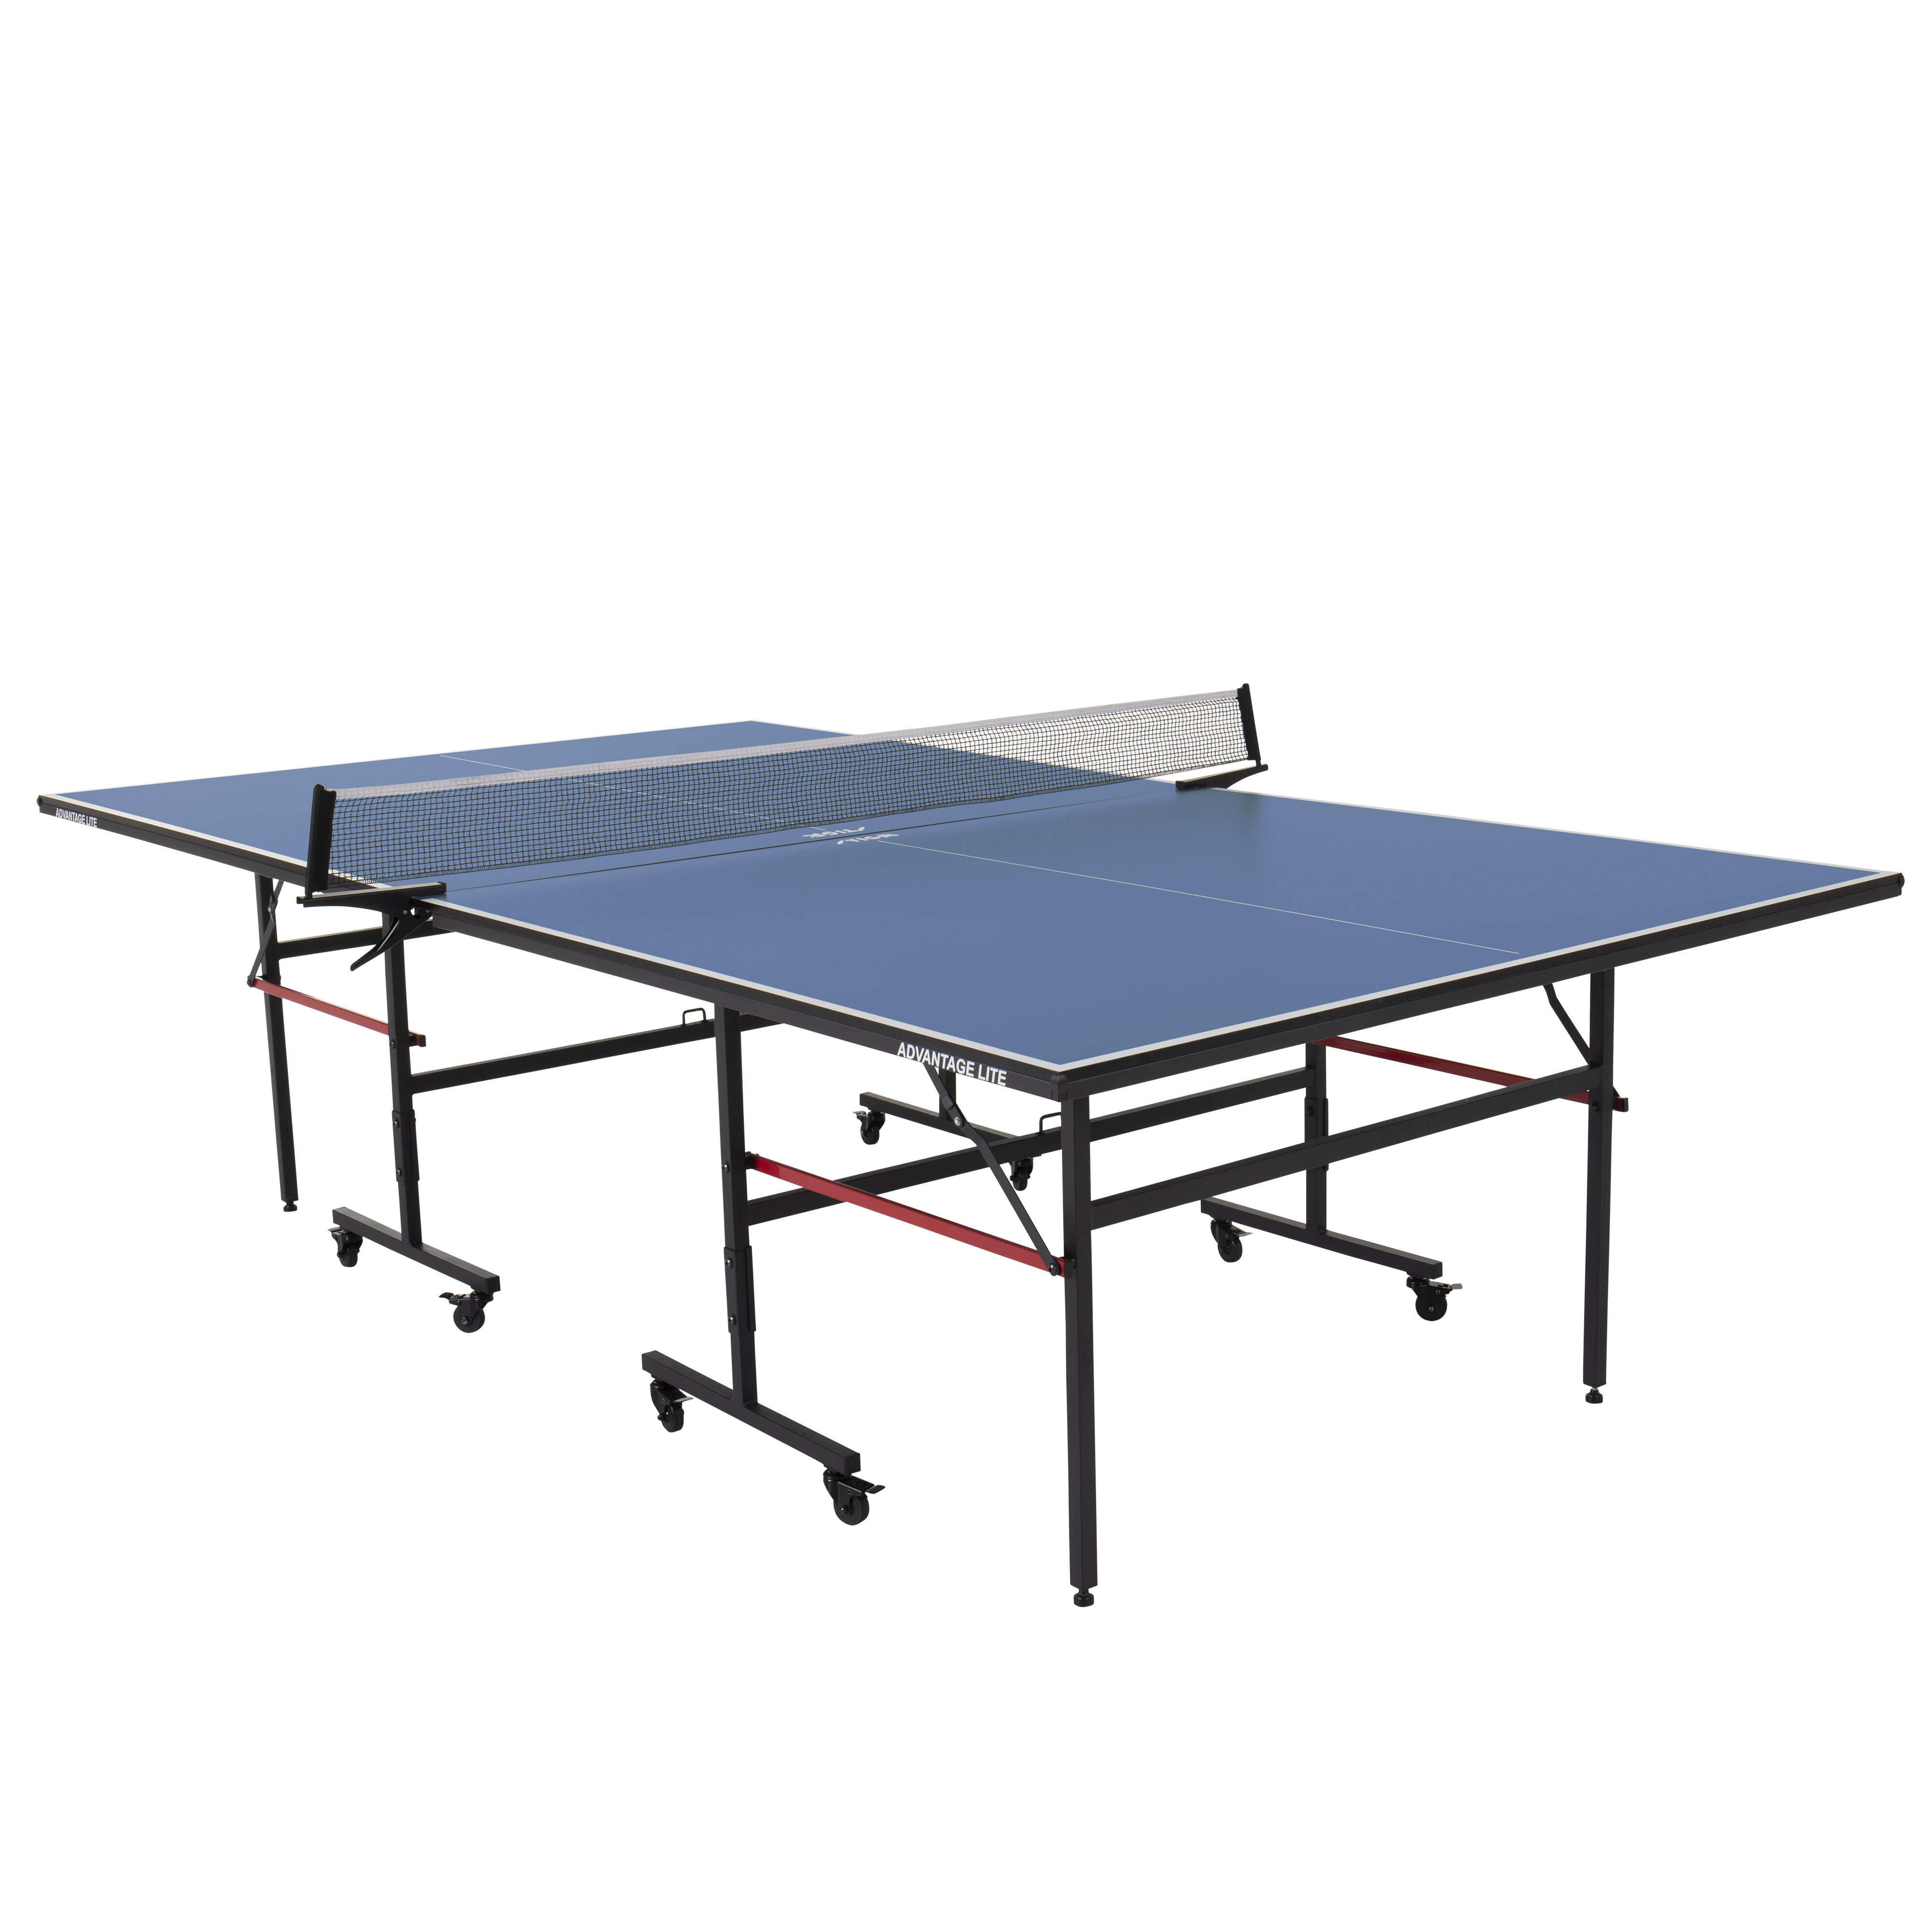 Tips on buying a table tennis table for your home